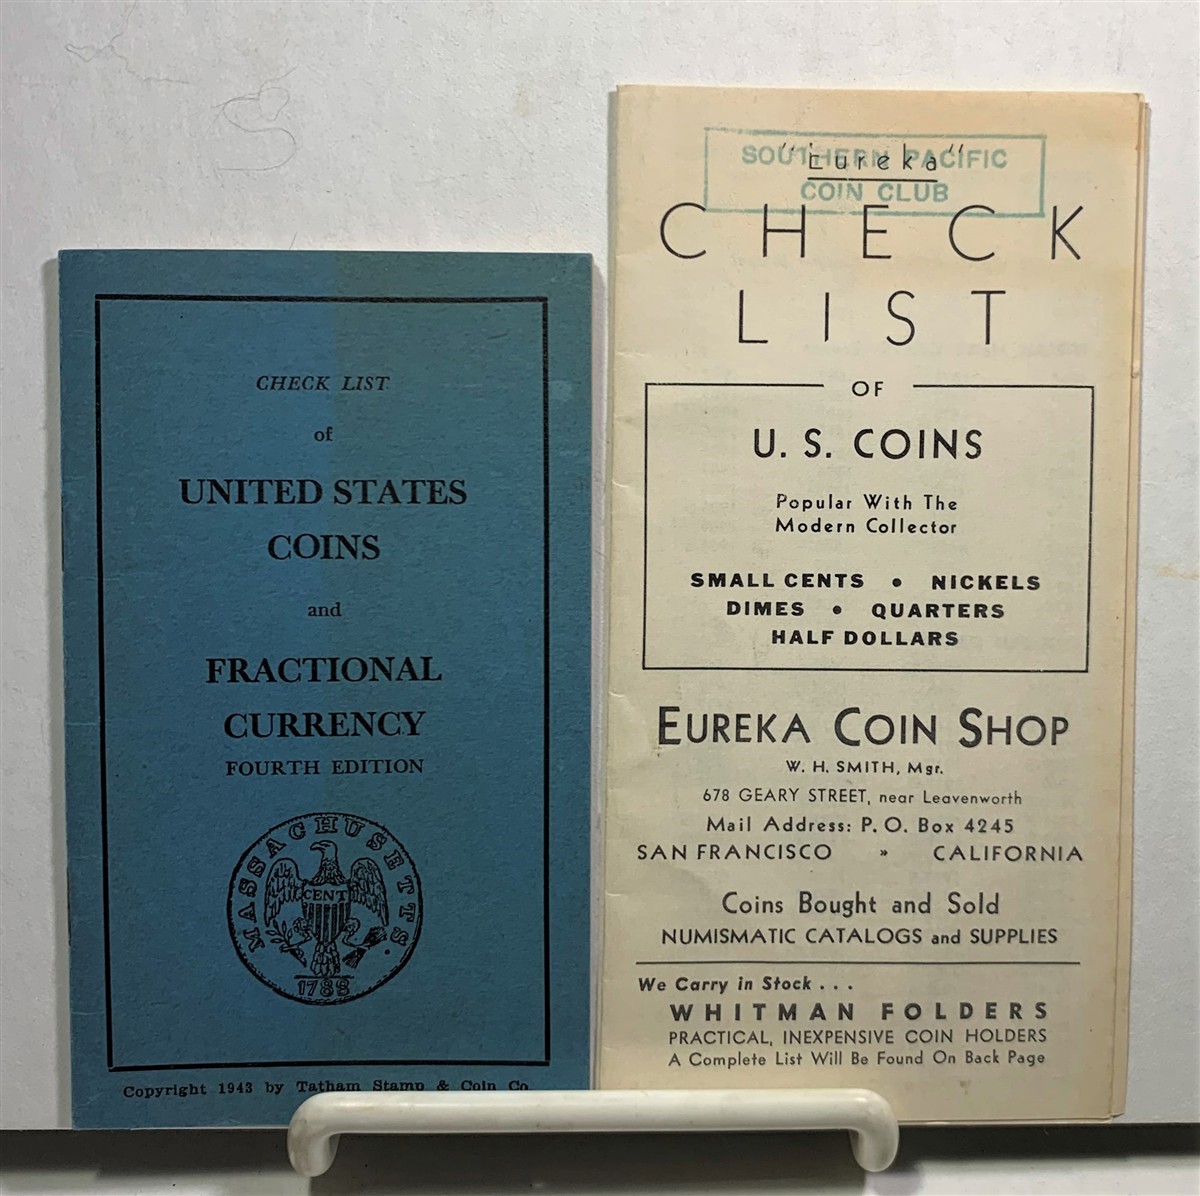 [EPHEMERA] [EUREKA COIN SHOP] [COIN COLLECTING] - Three Pieces of Ephemera : Two Check Lists from the Eureka Coin Shop and a Check List from the Tatham Stamp & Coin Company